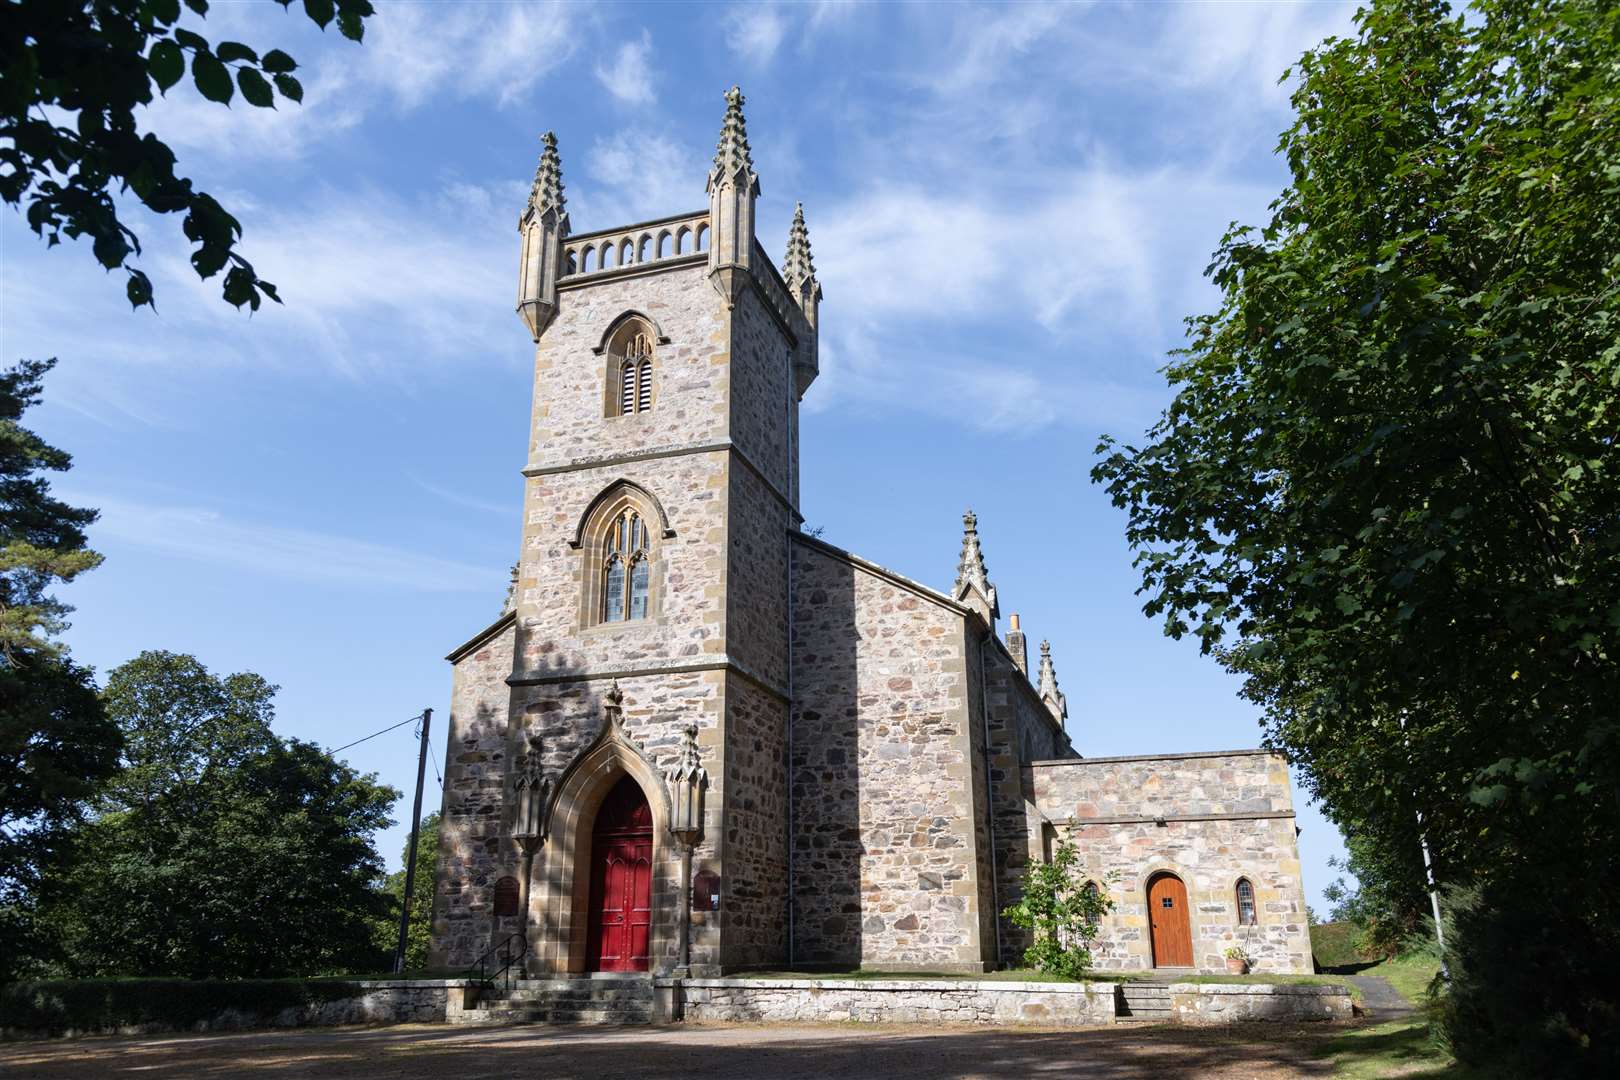 Rafford Church was built in 1824 with alterations and additions in 1907.